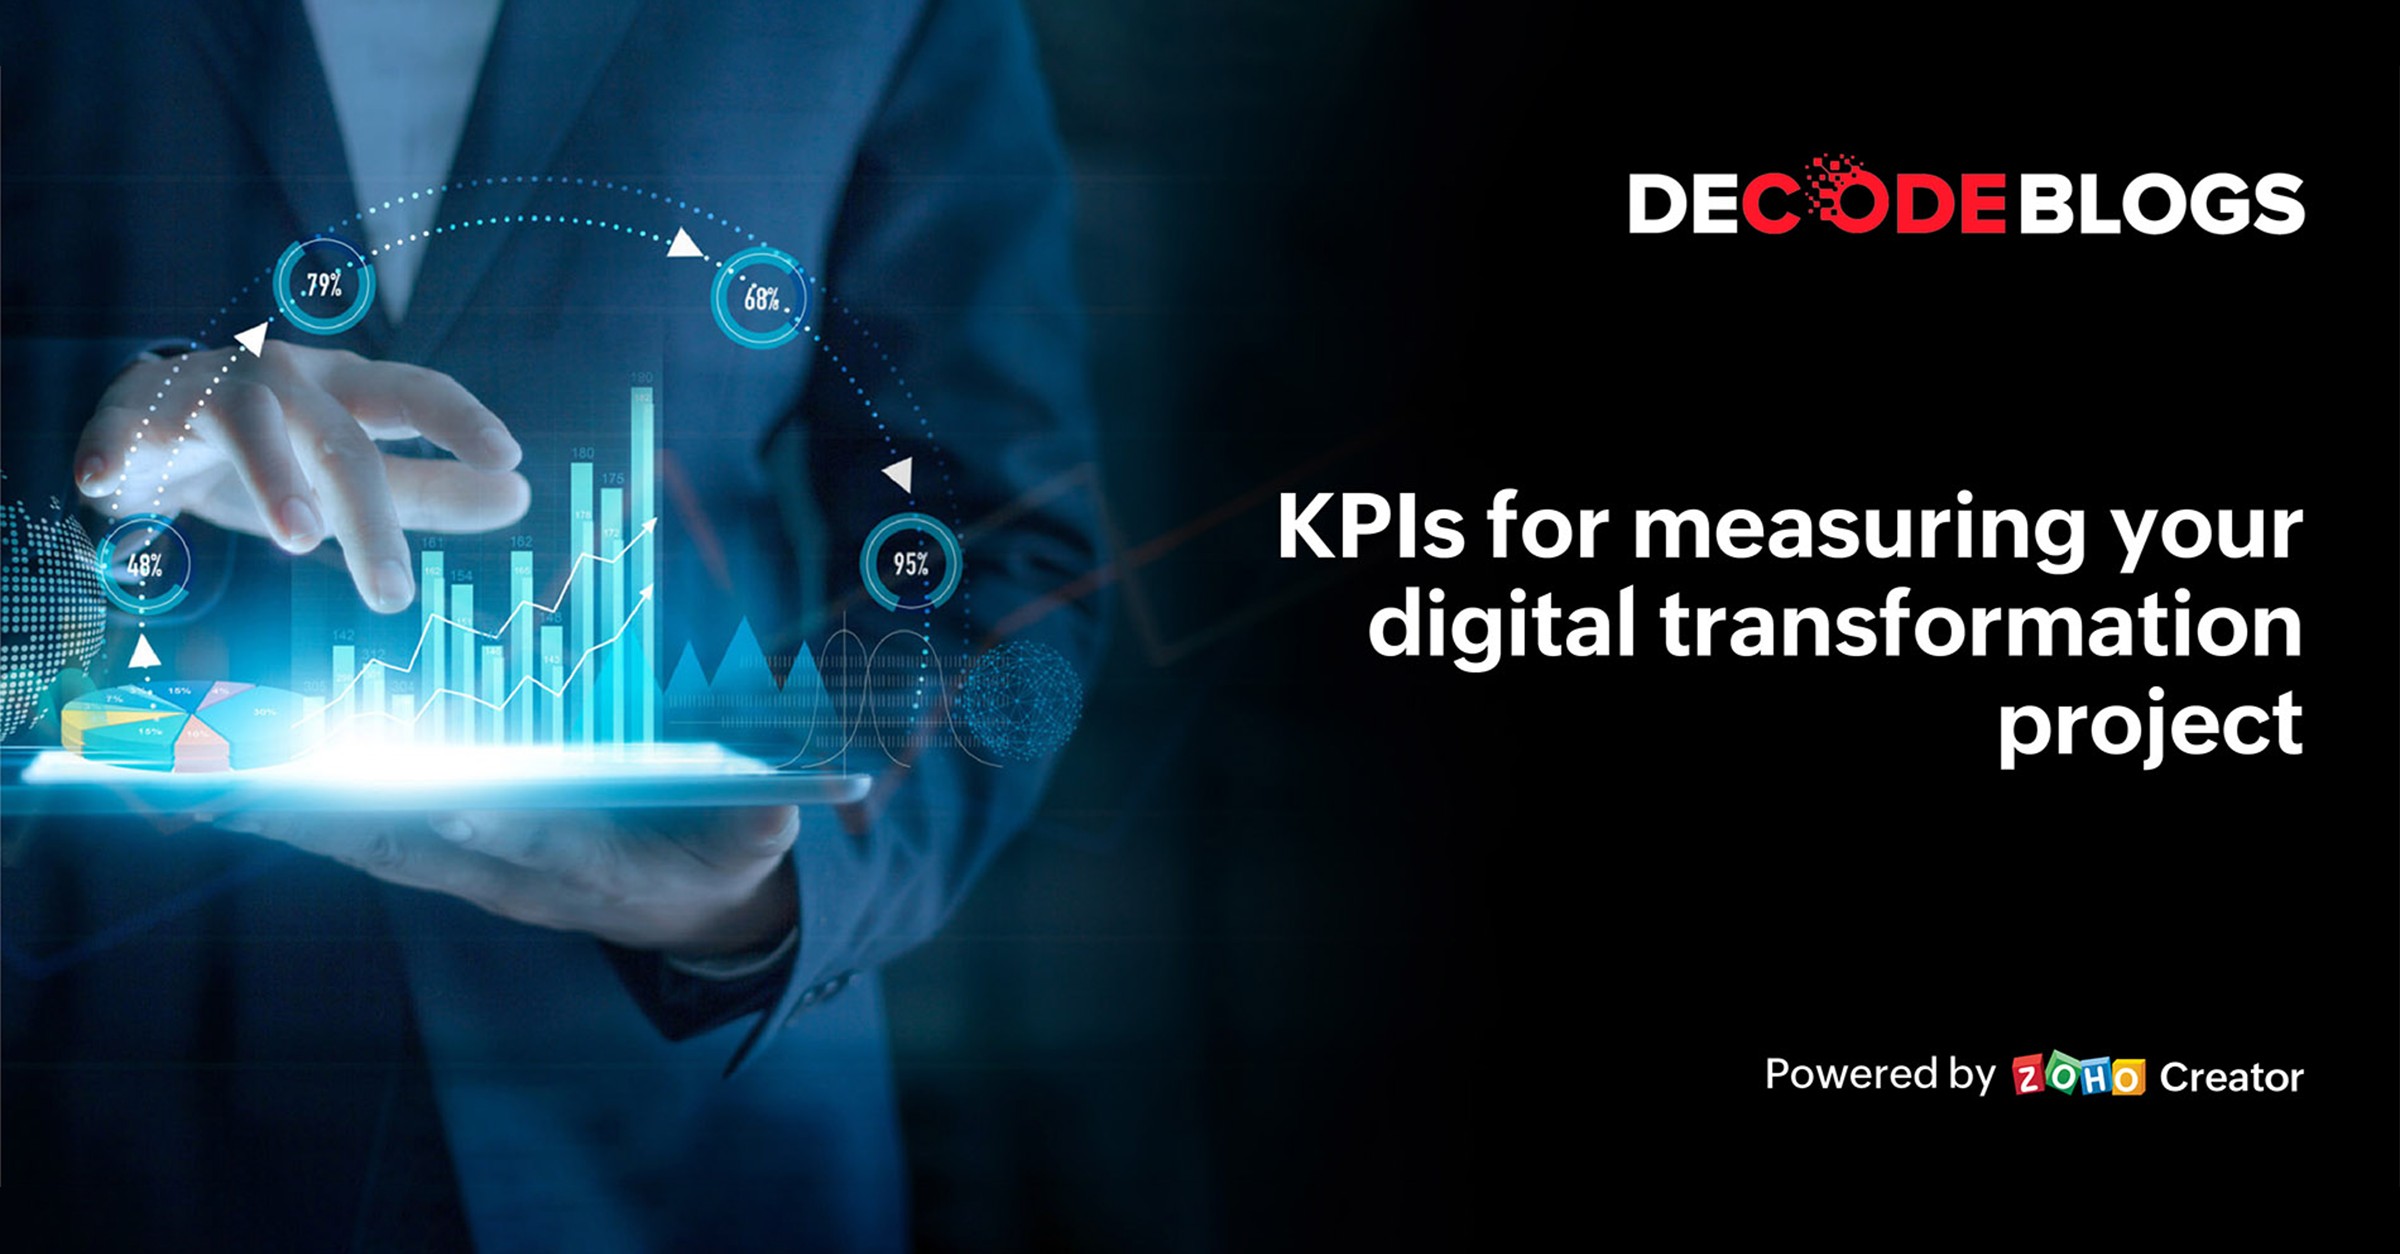 KPIs to measure your